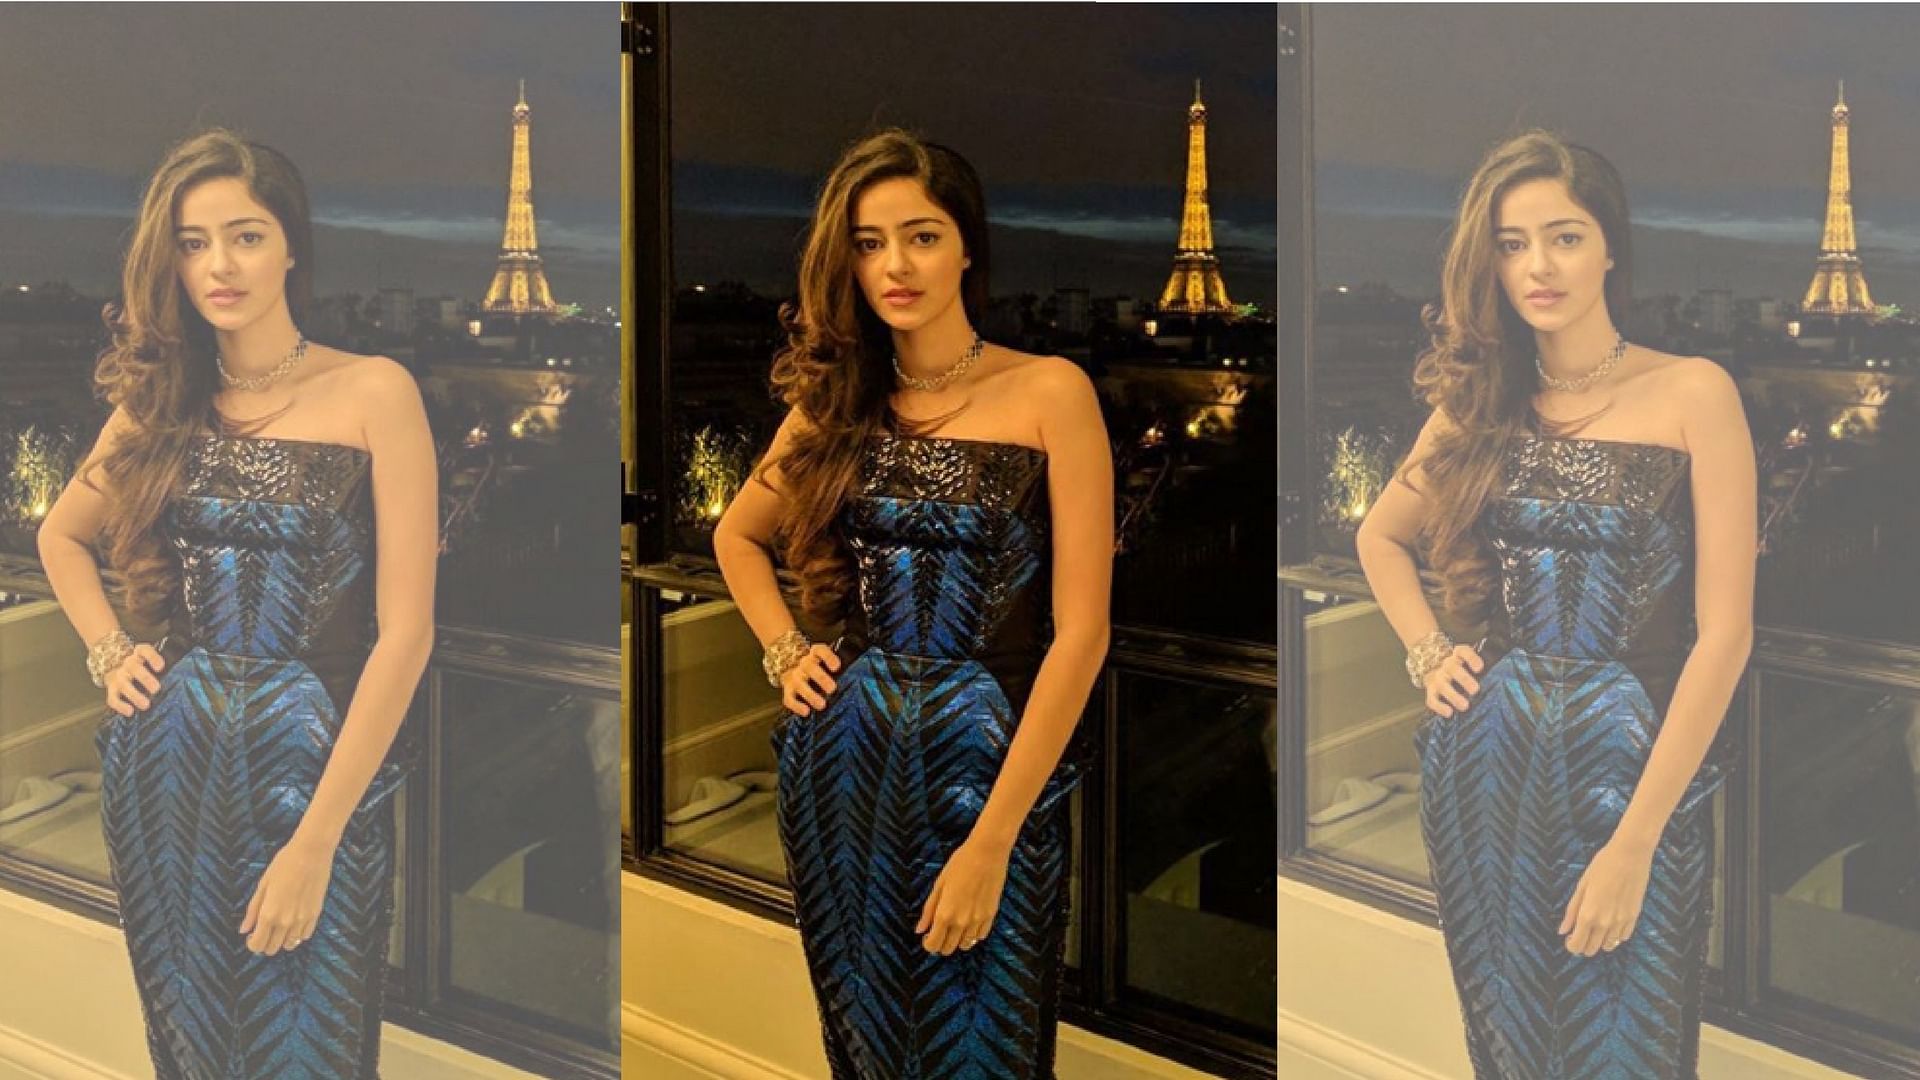 Ananya Panday made her debut in the 25th annual Bal des Débutantes in Paris.